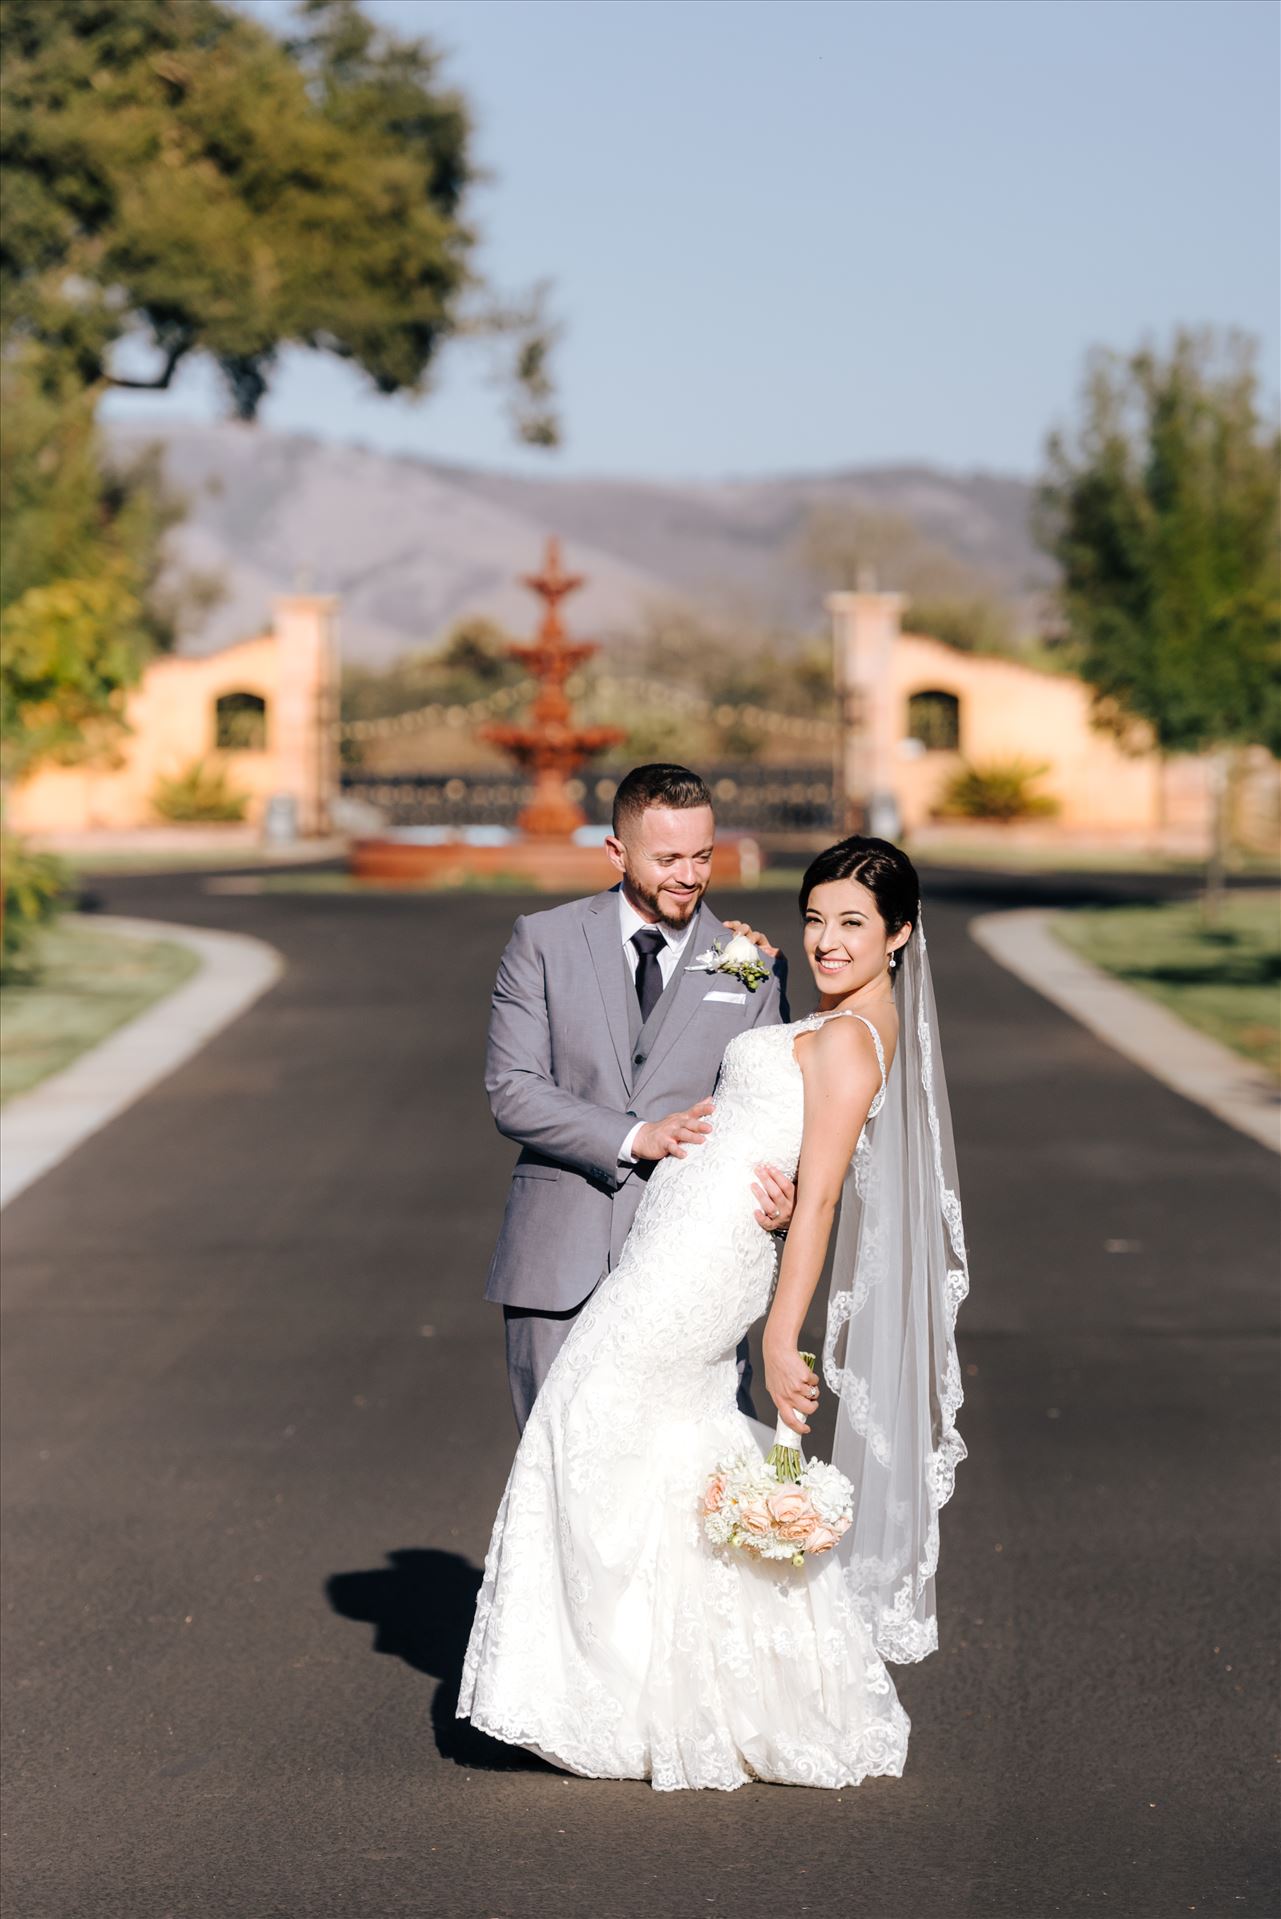 FW-5336.JPGArroyo Grande California Country Chic and Elegant wedding by Mirror's Edge Photography, San Luis Obispo County Wedding Photographer.  Bride and Groom at A&C Ranch.